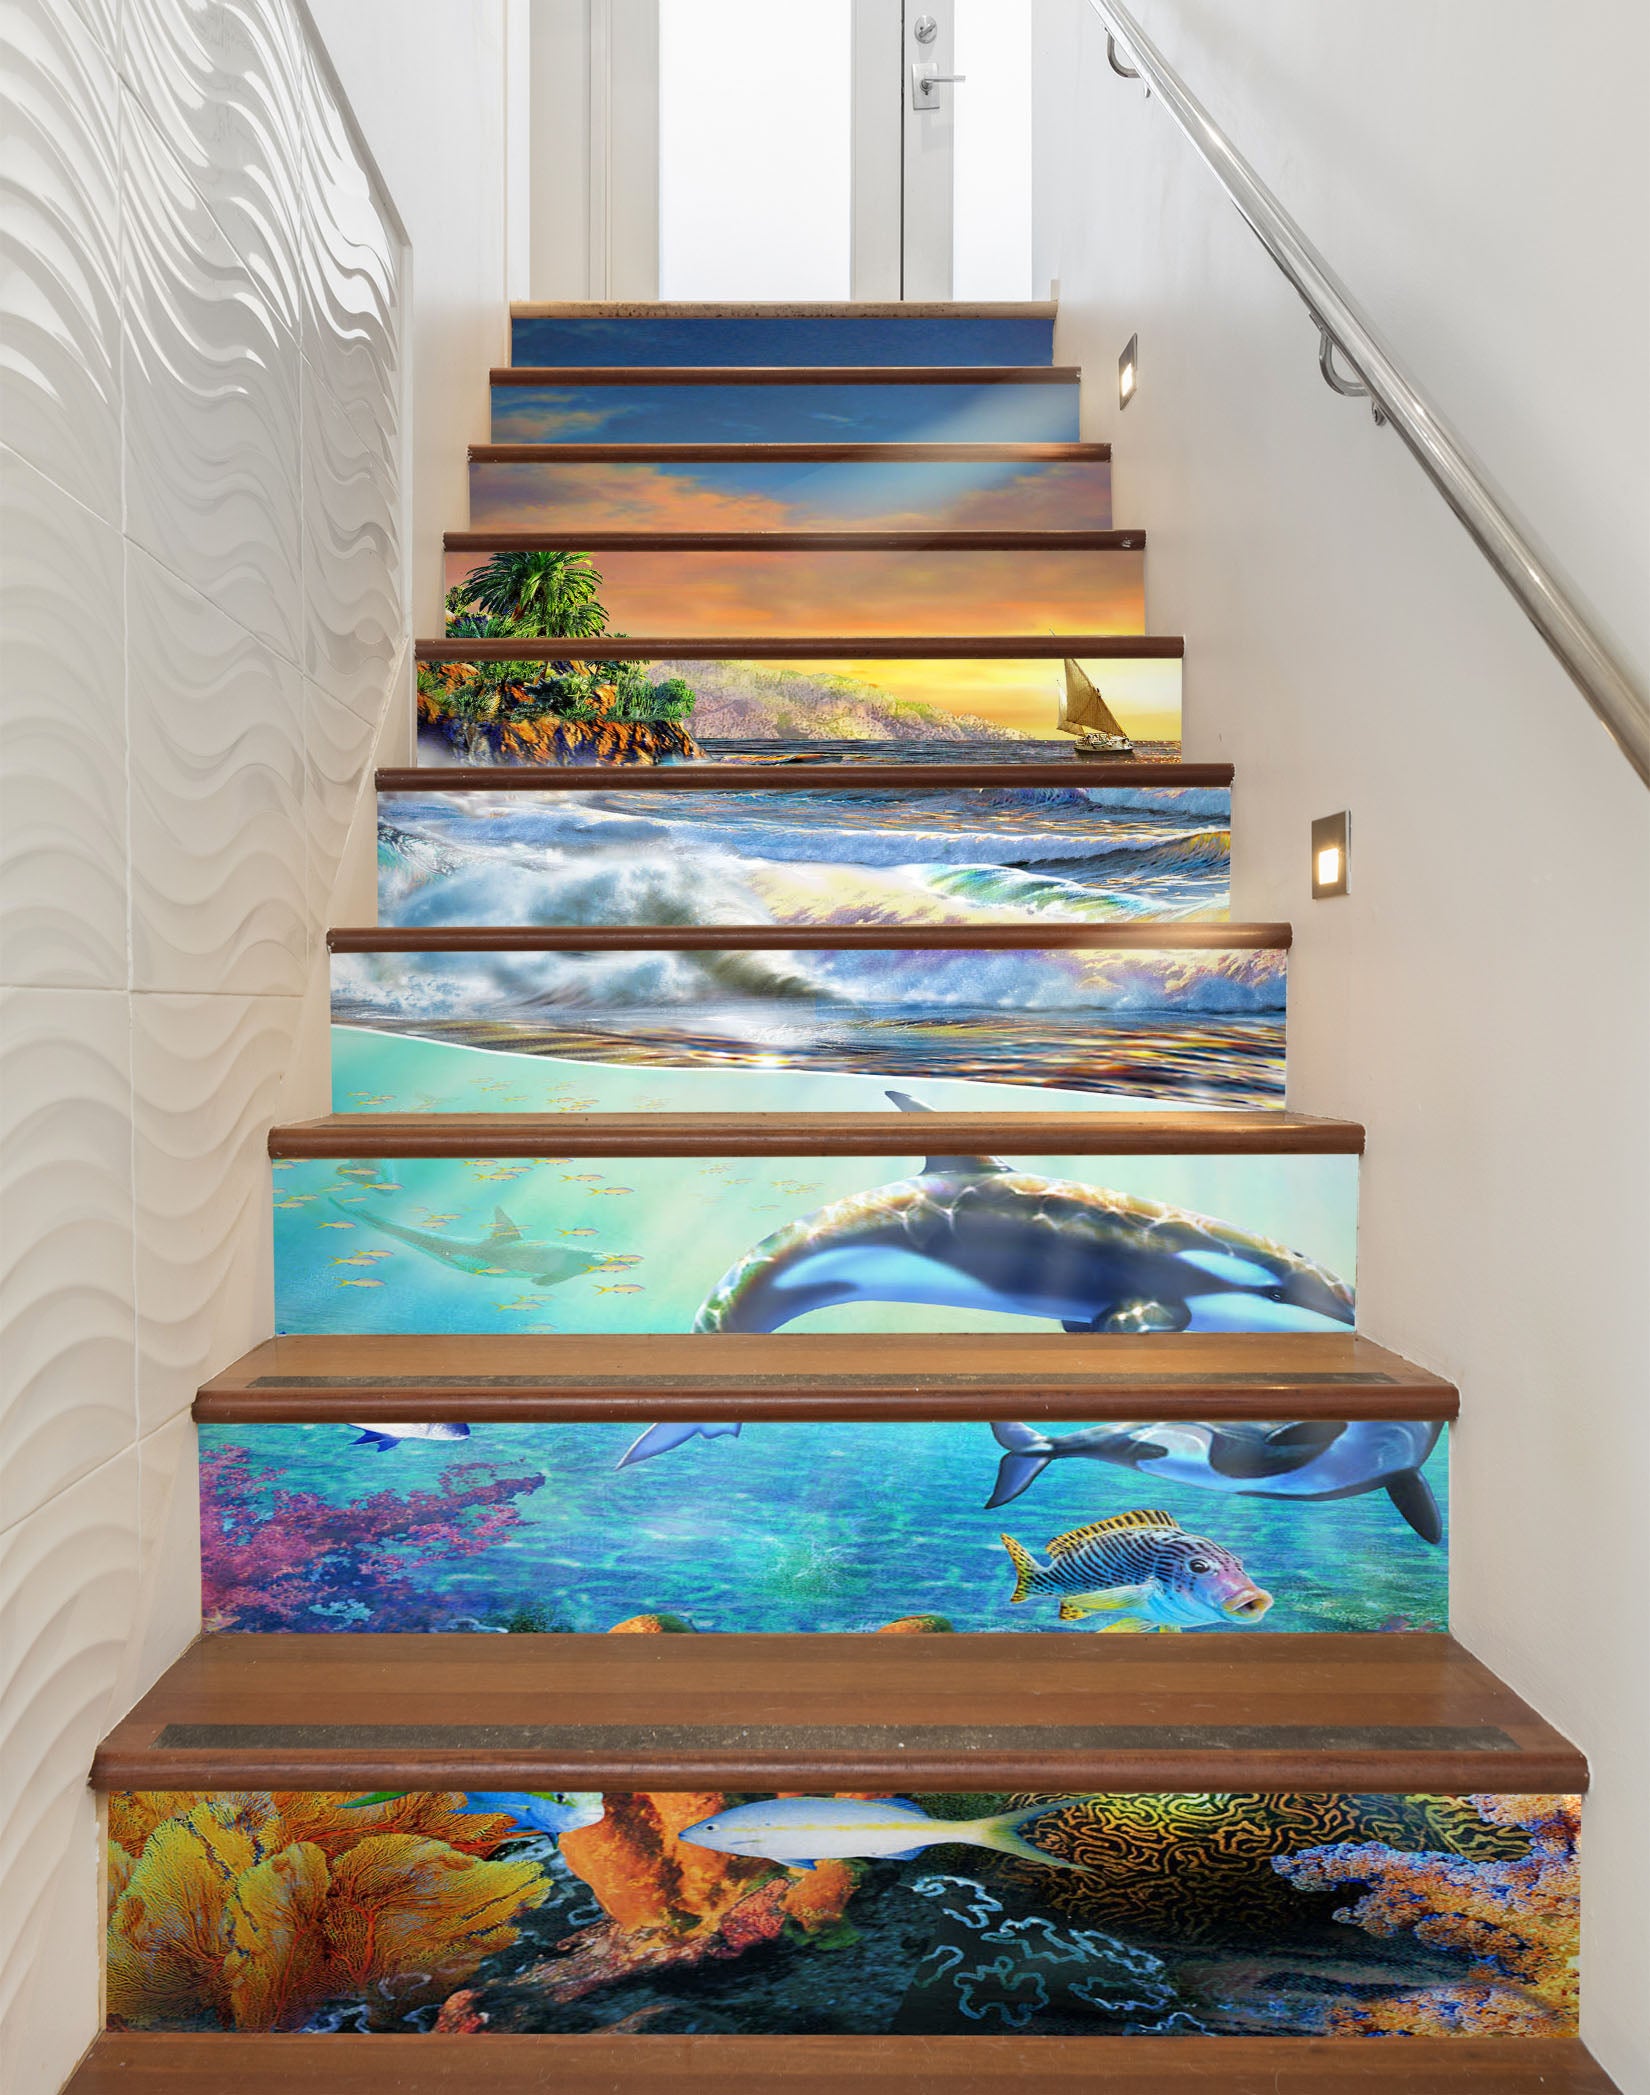 3D Underwater Whale 96168 Adrian Chesterman Stair Risers